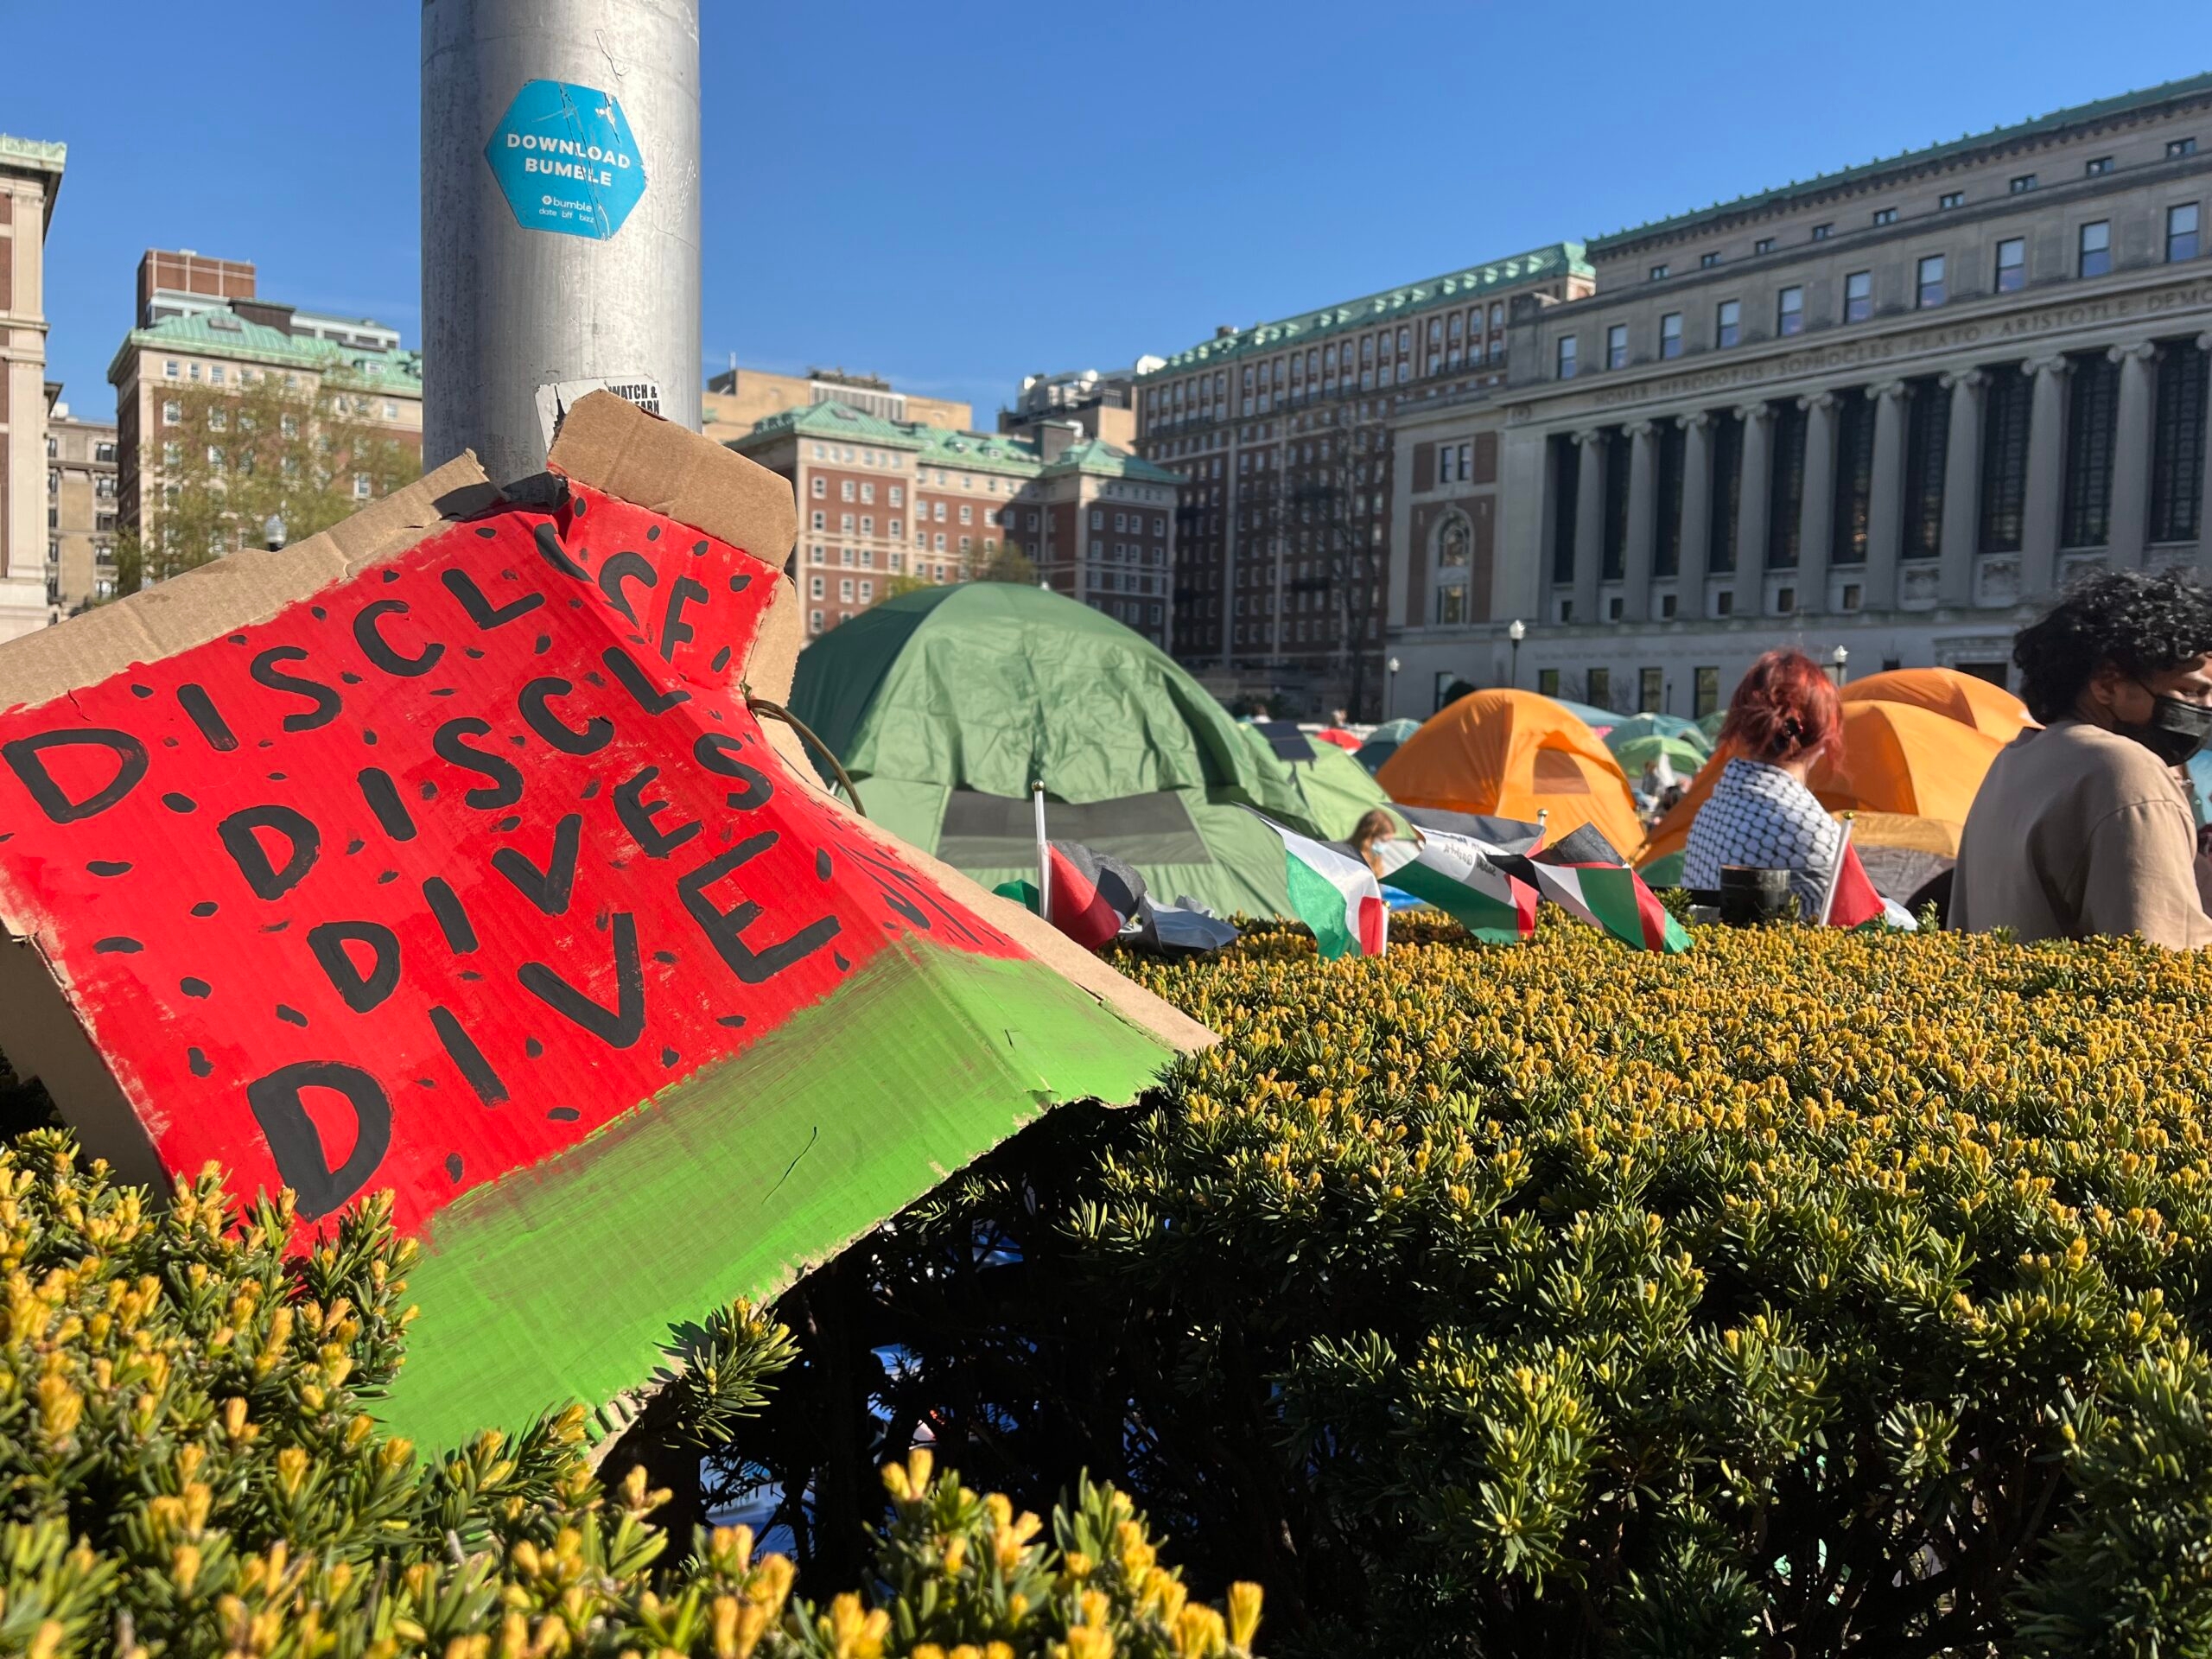 Columbia says it ‘will not divest from Israel,’ moves to close encampment following failed negotiations